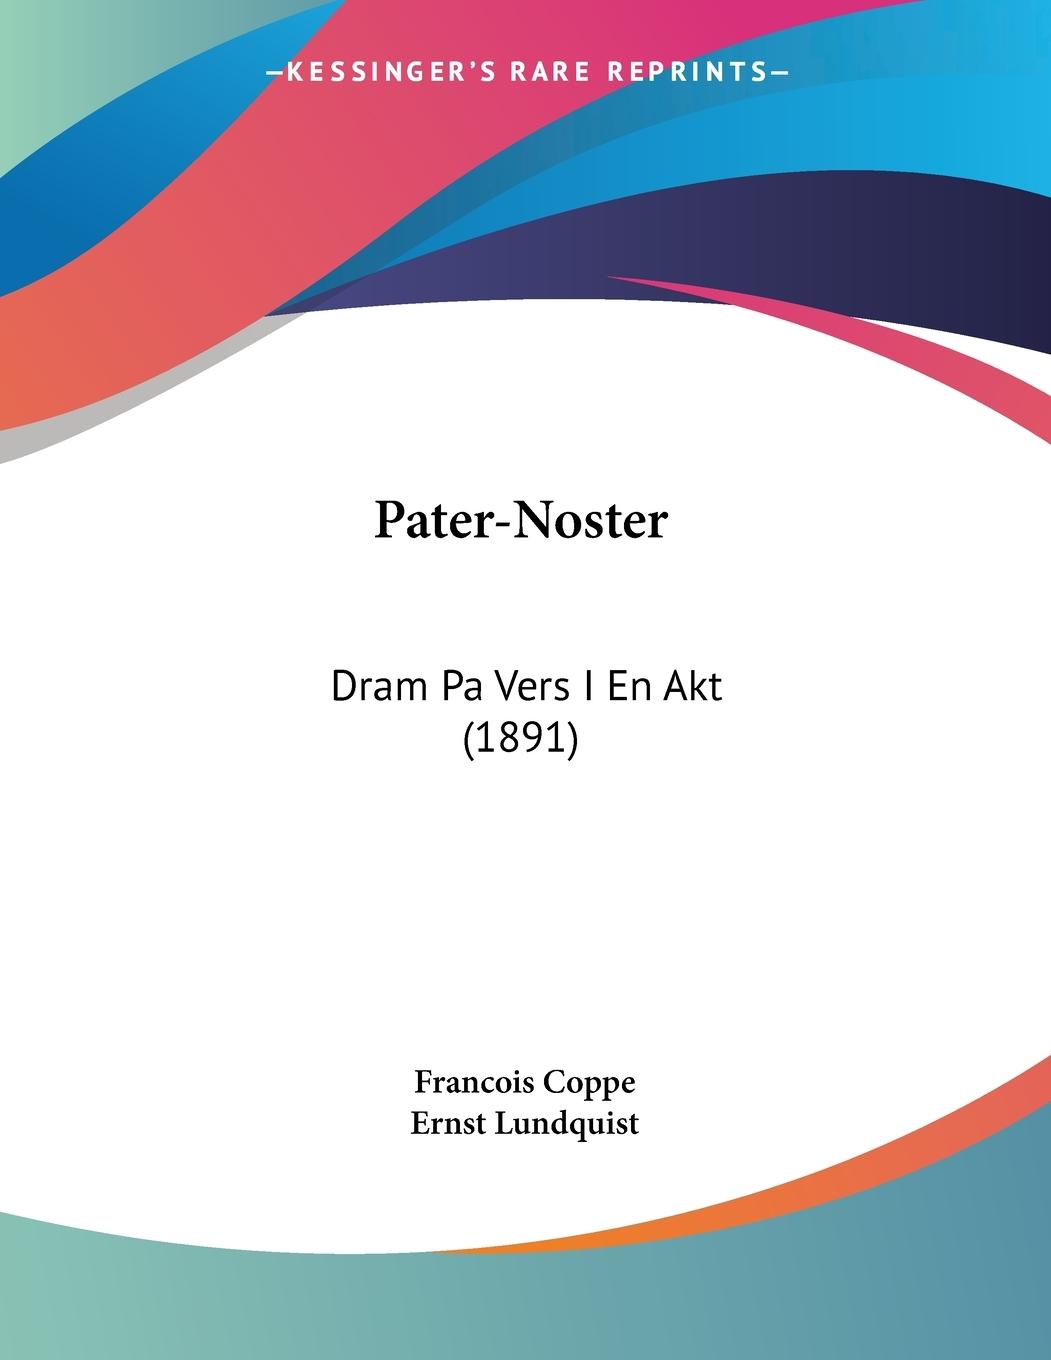 Pater-Noster - Coppe, Francois